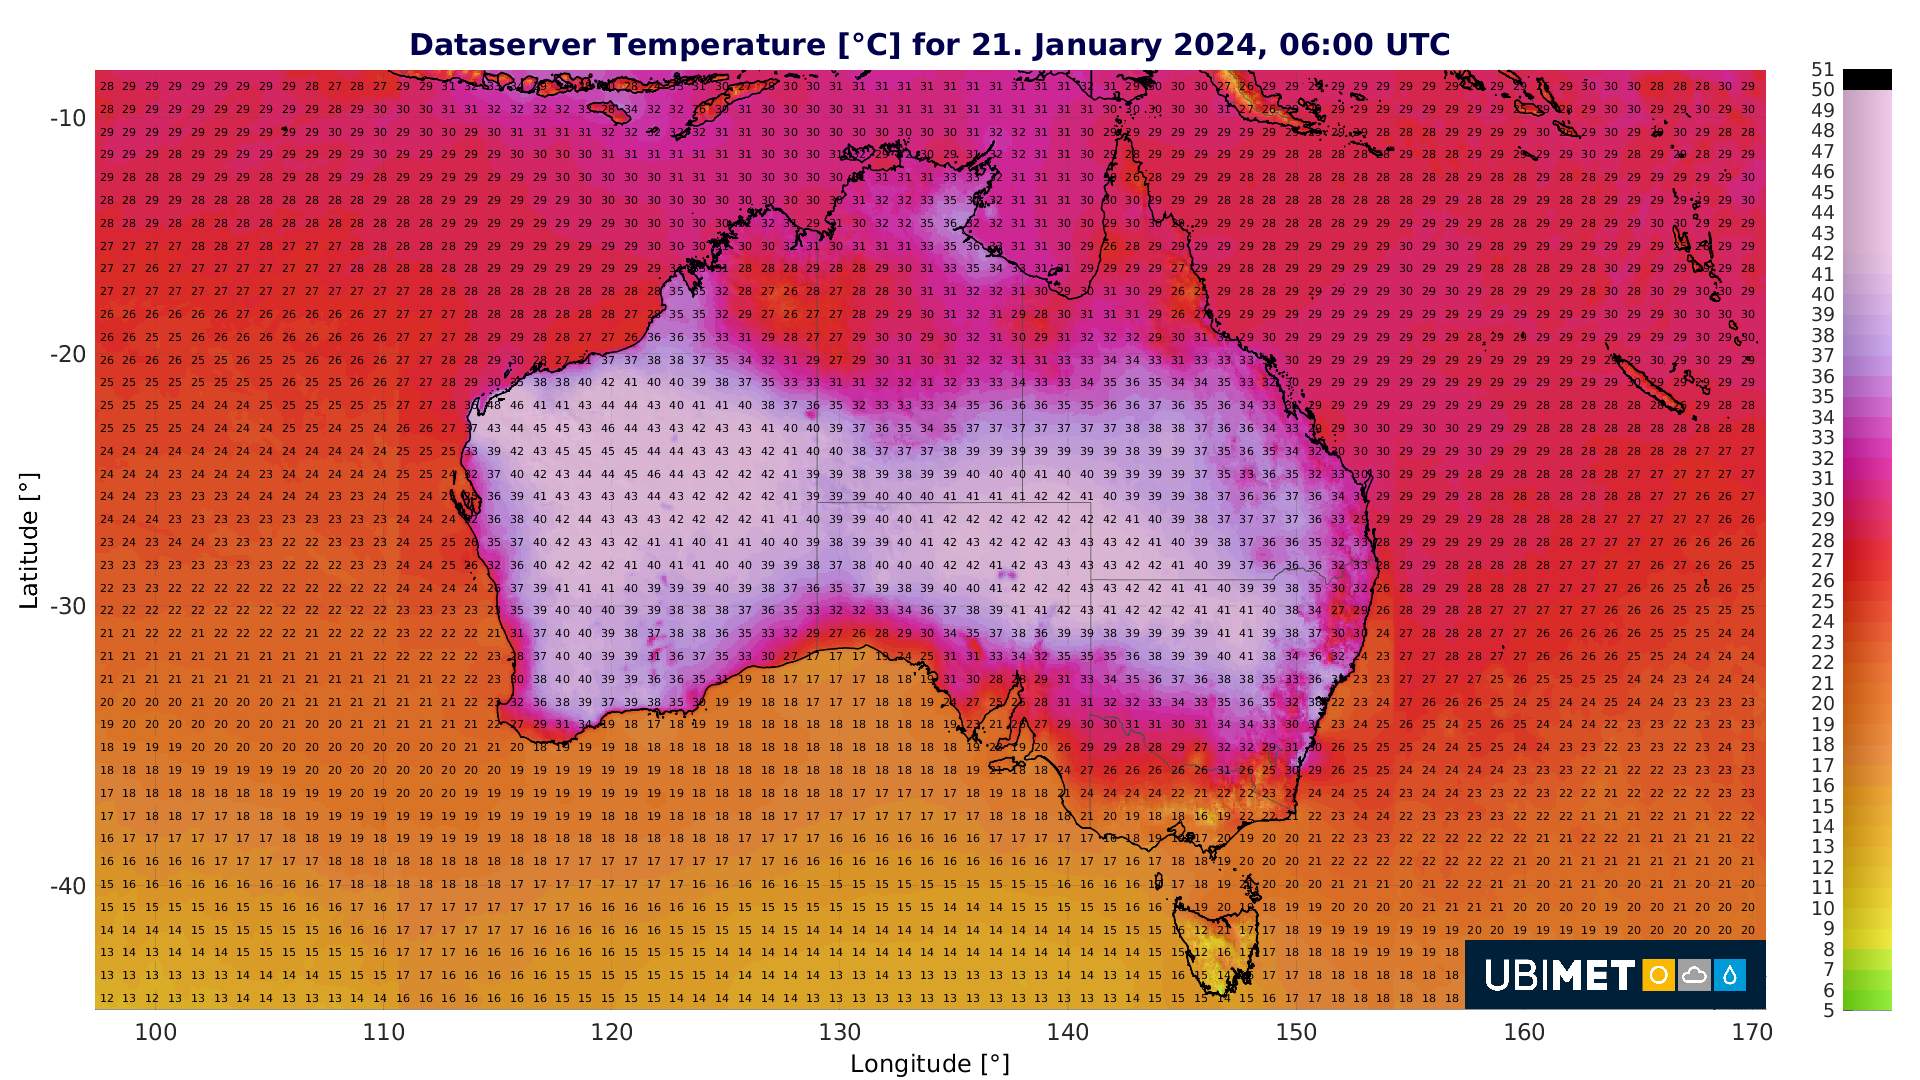 Fig. 1: Temperature analysis of January 21 according to UCM; Source: UBIMET